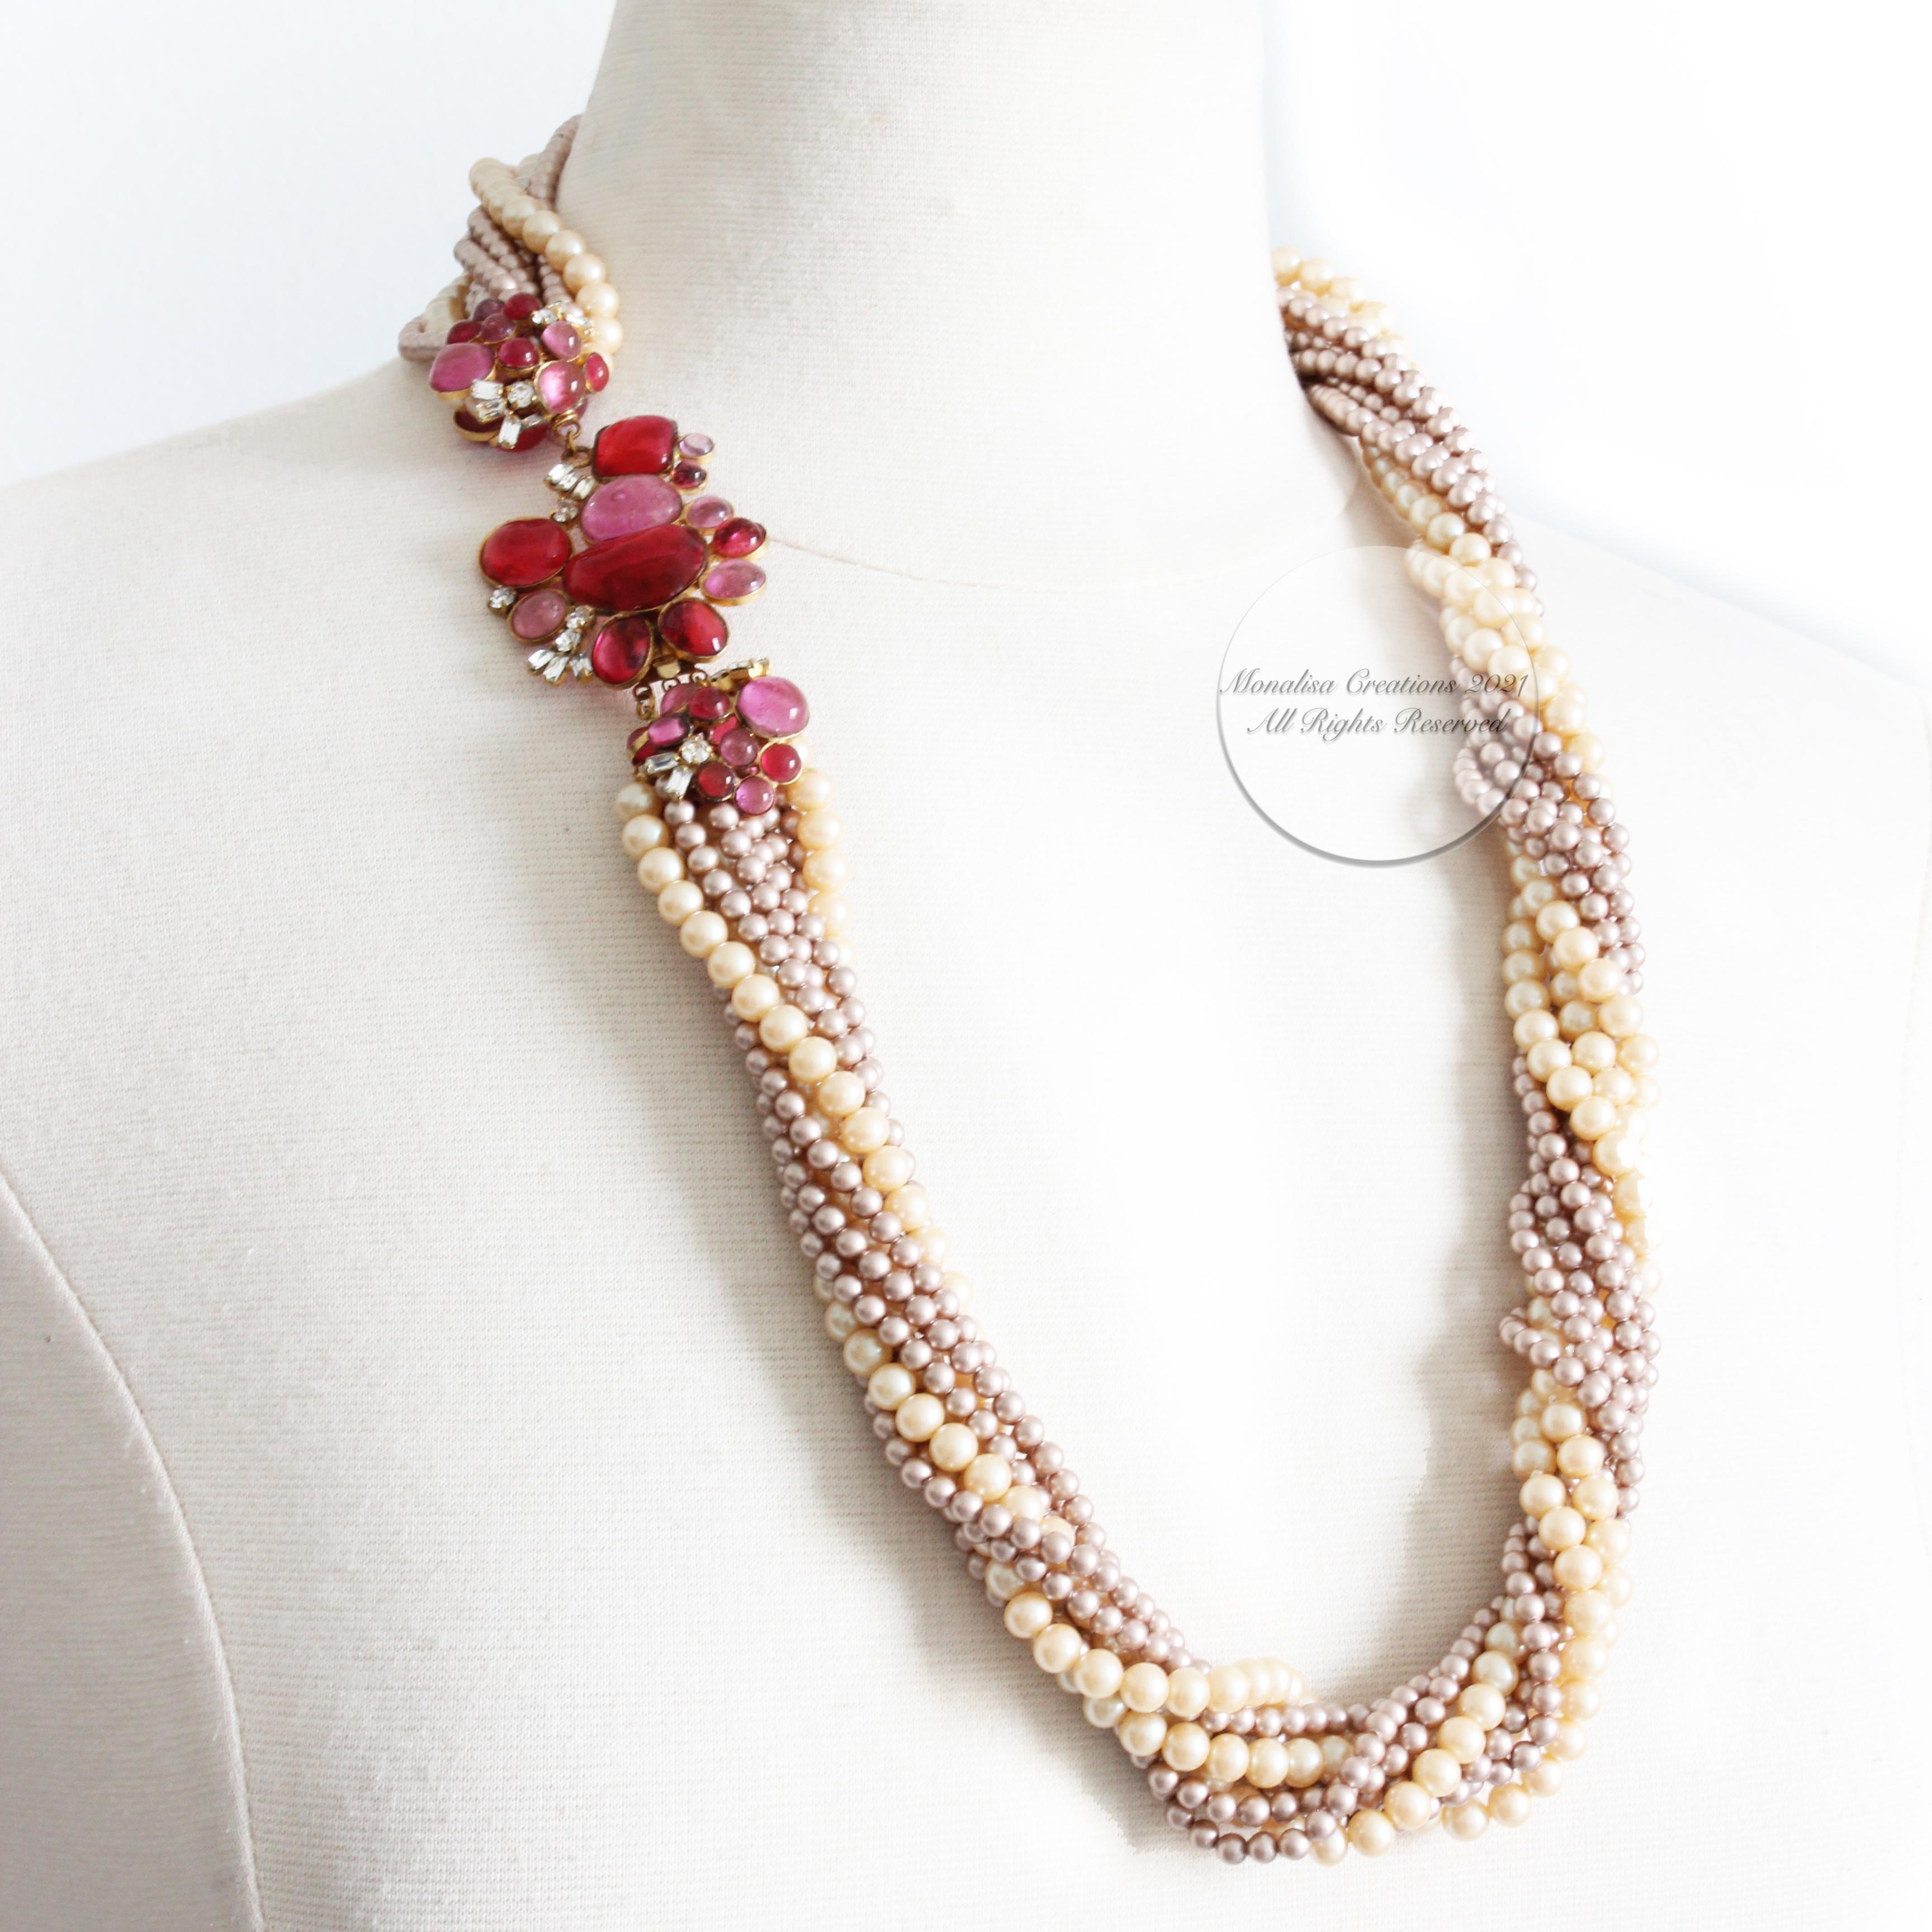 Baroque Chanel Necklace Faux Pearl Multistrand Poured Glass Camellia Accents Goossens 